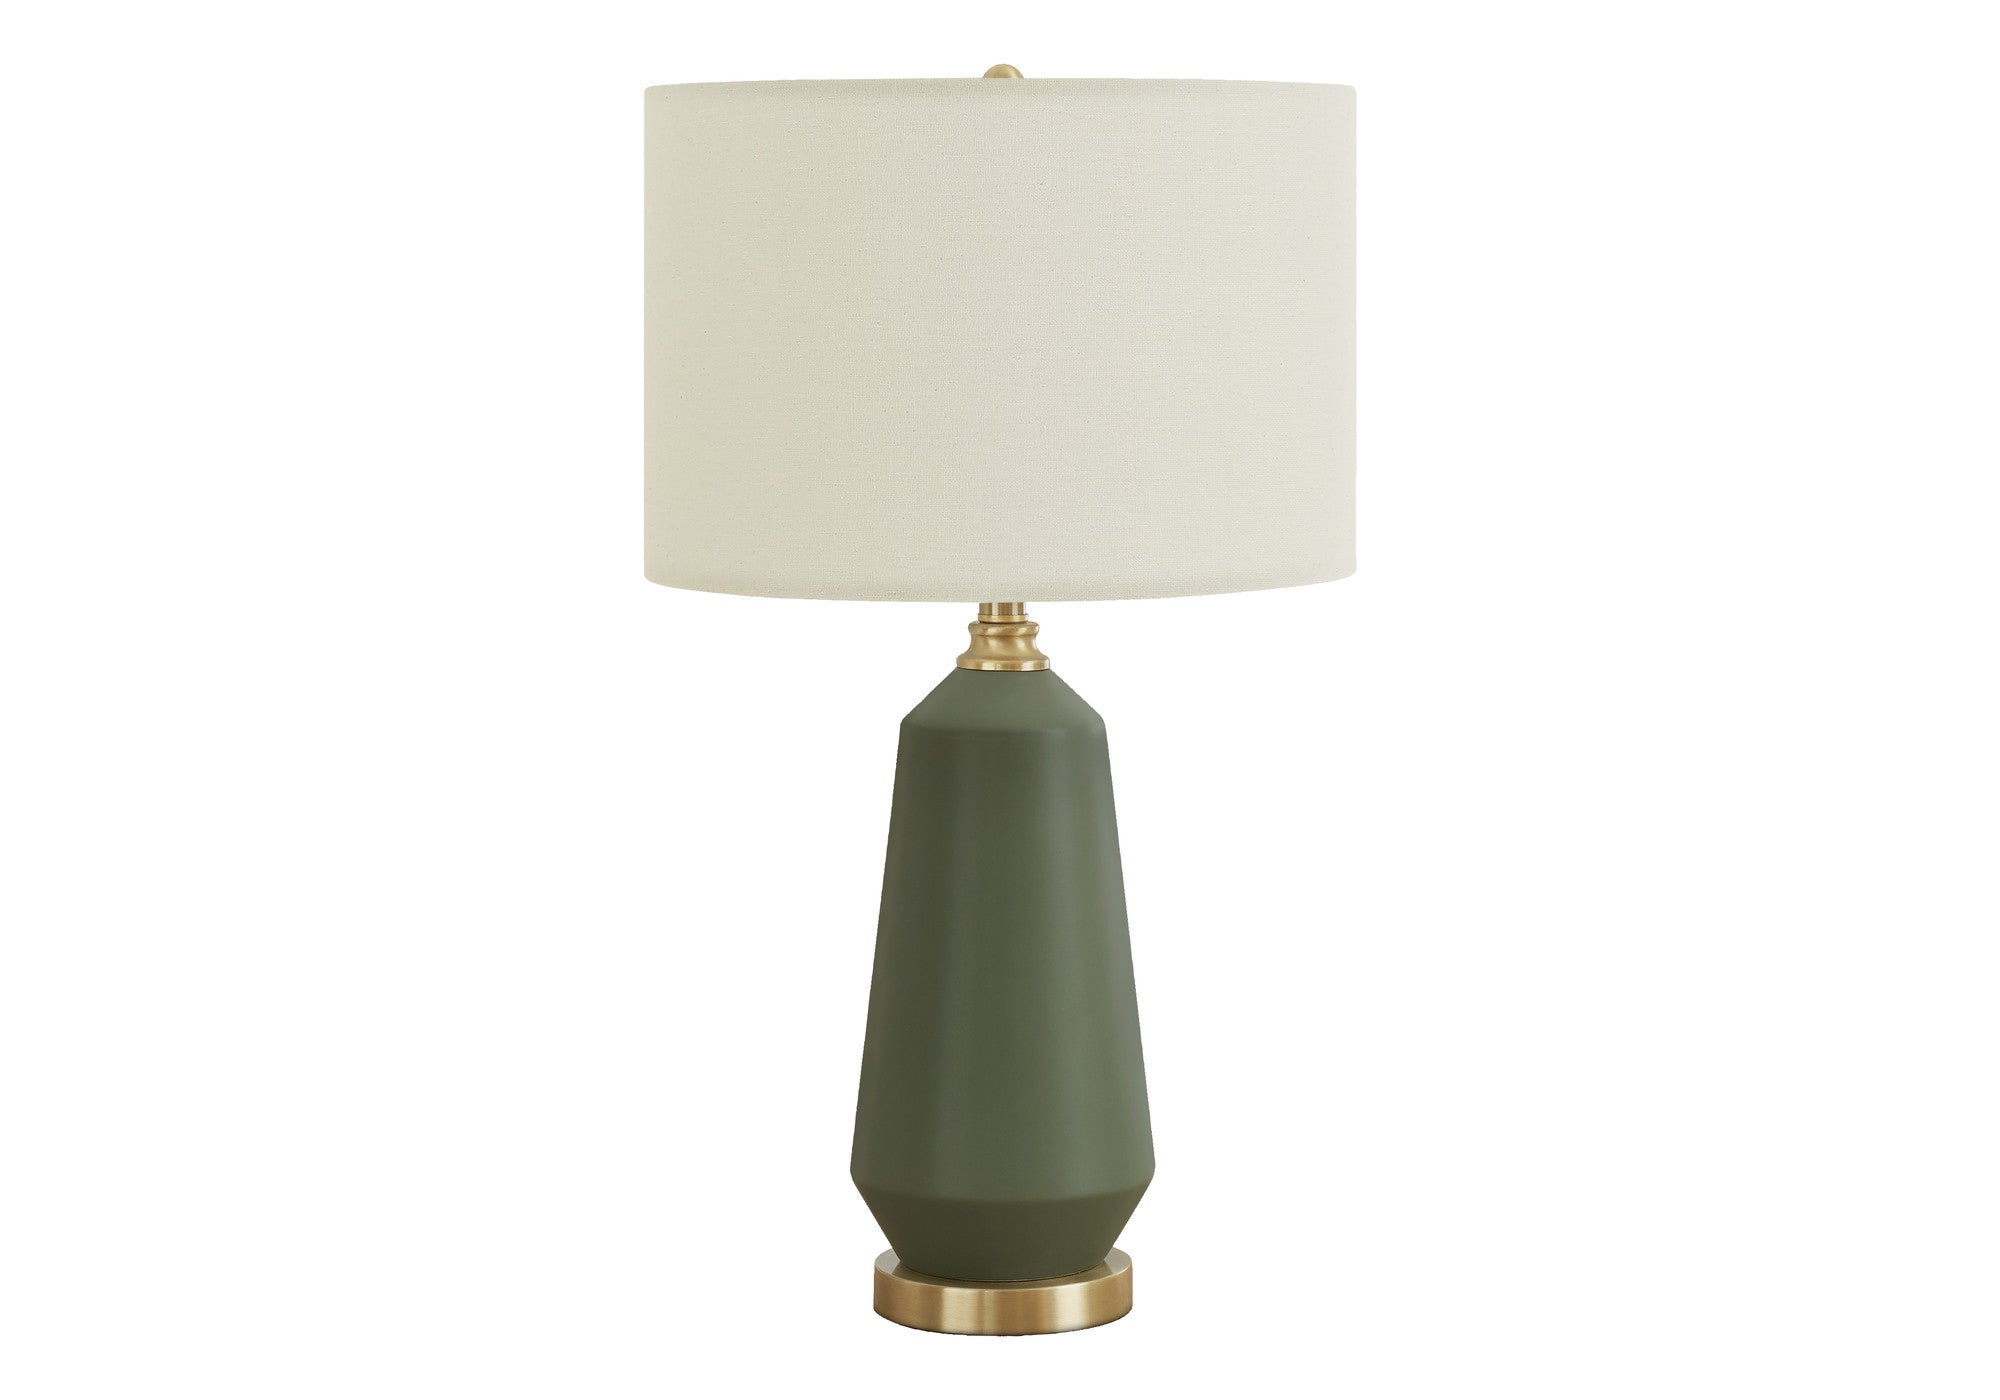 26" Green Ceramic Geometric Table Lamp With Ivory Drum Shade